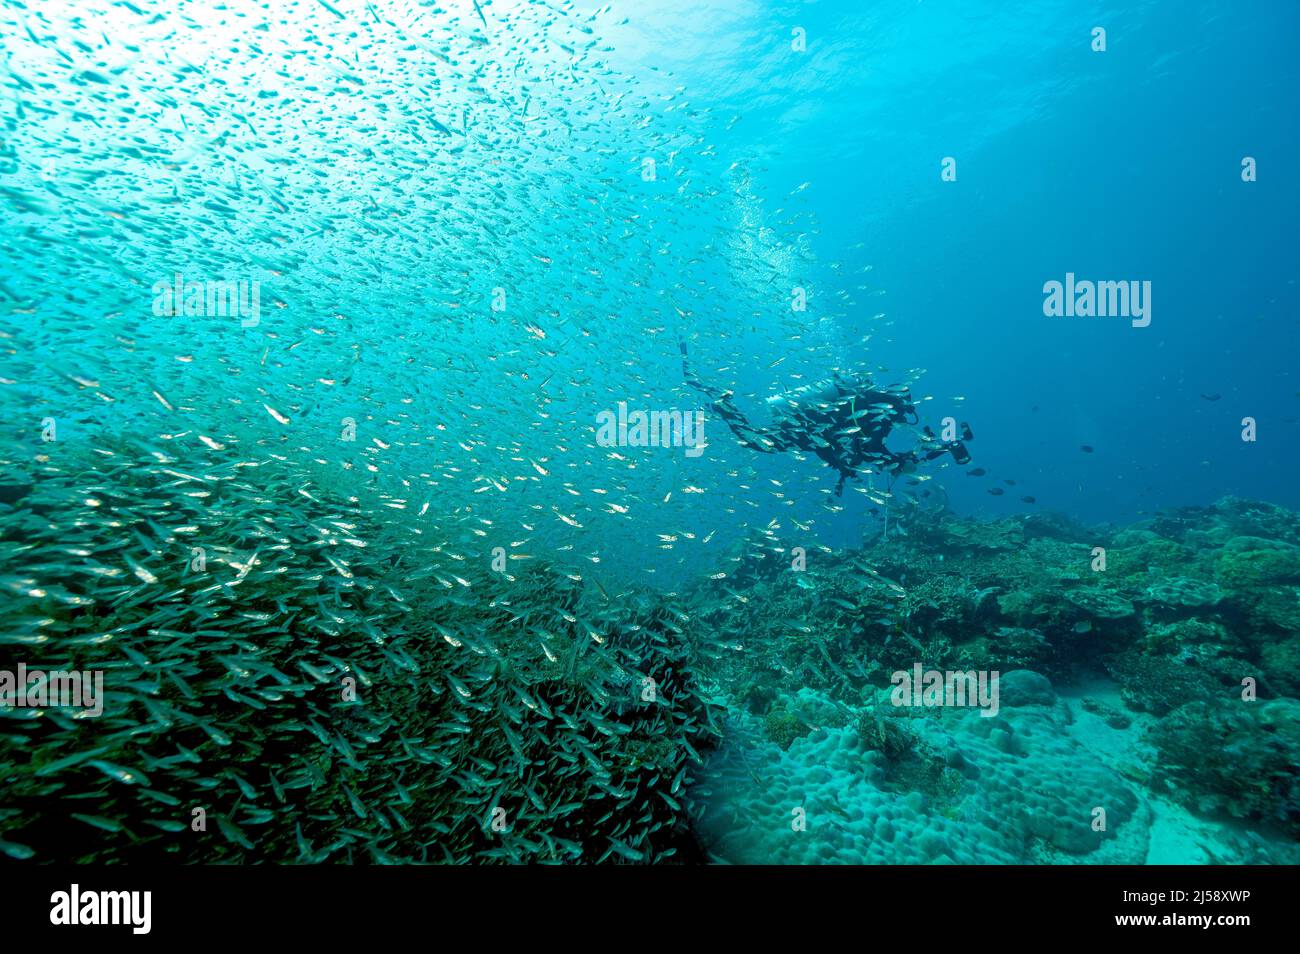 Coral reef scenic with glass fishes and hard corals, Raja Ampat Indonesia. Stock Photo